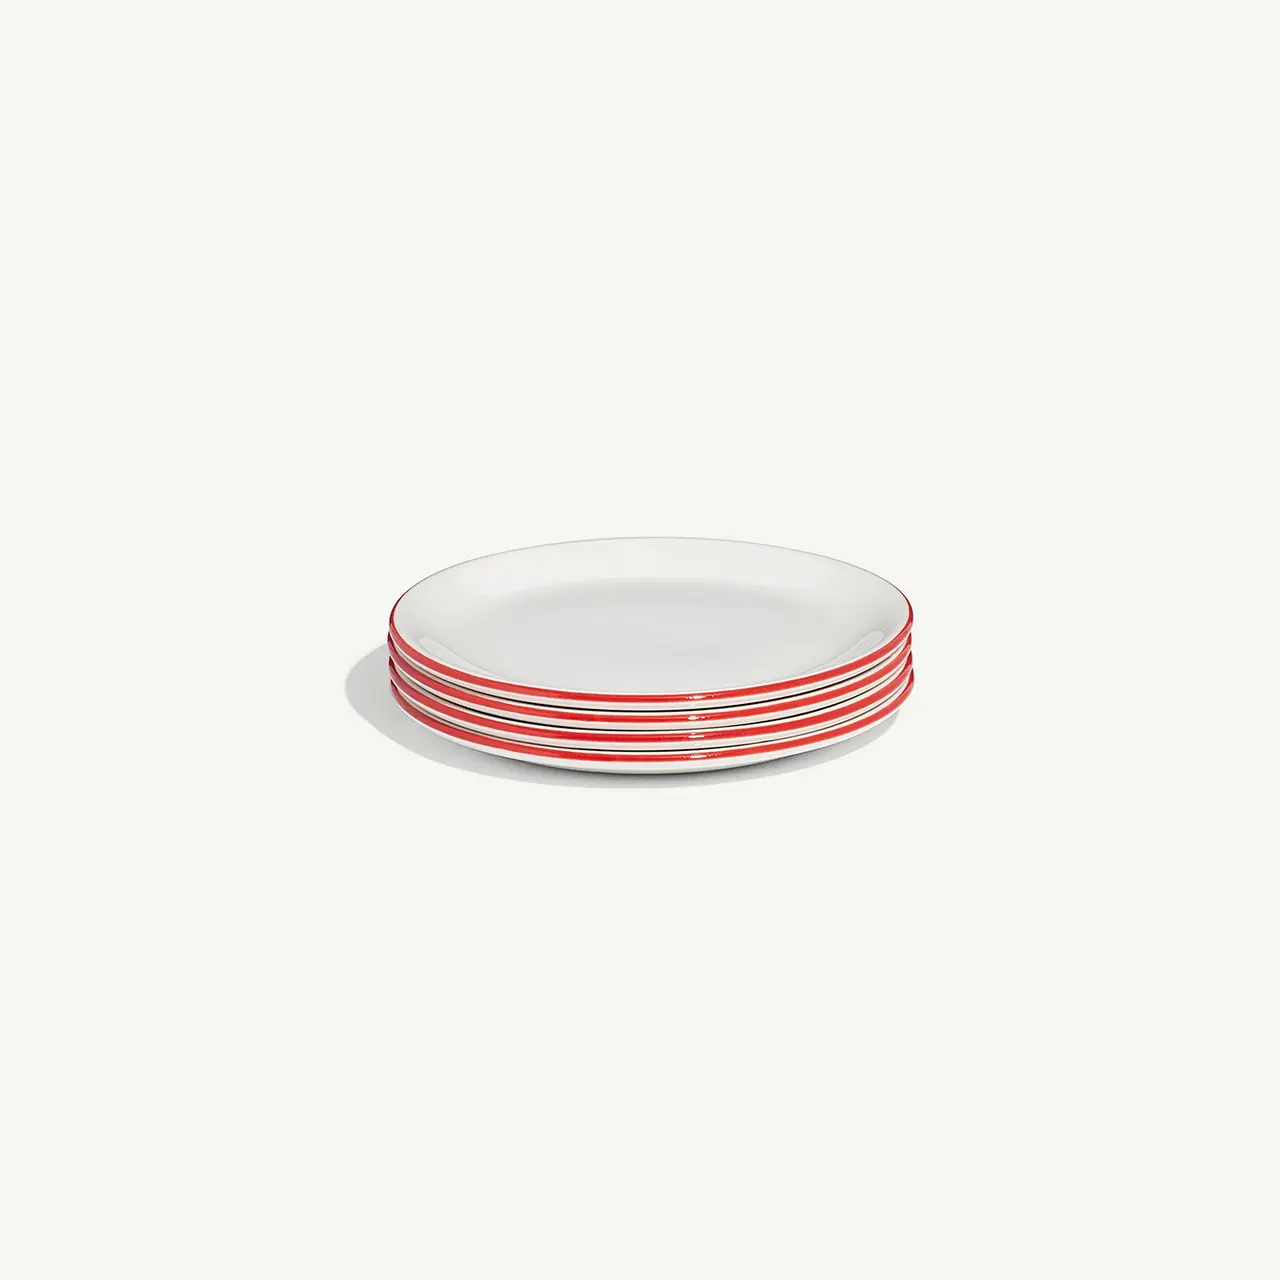 A stack of white plates with a red stripe around the rim sits on a plain background.